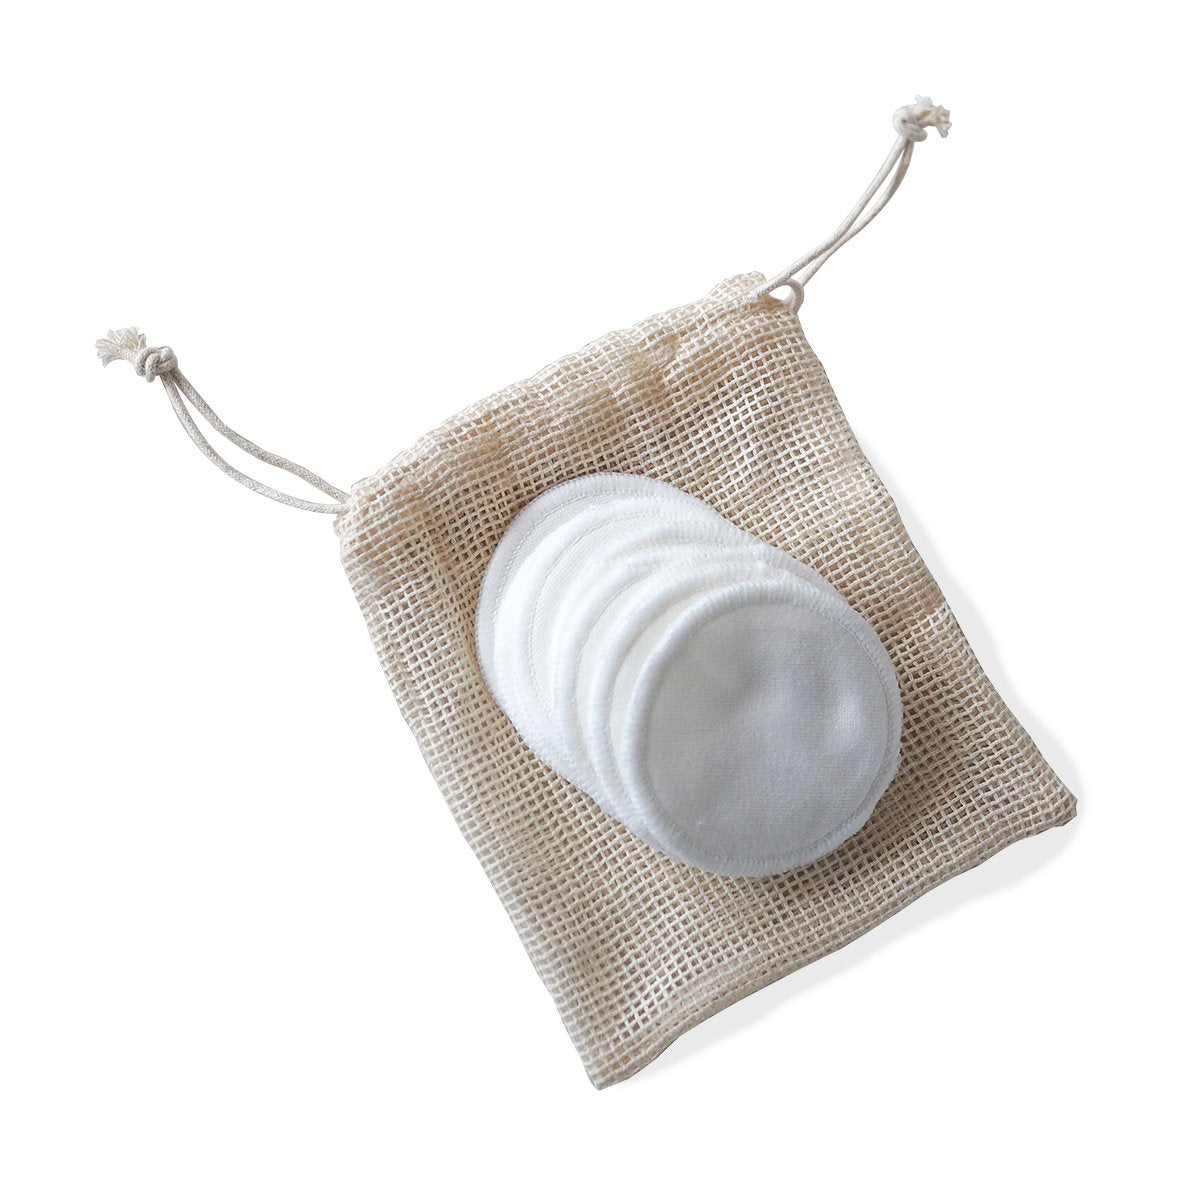 Reusable make up remover pads - Dot and Frankie